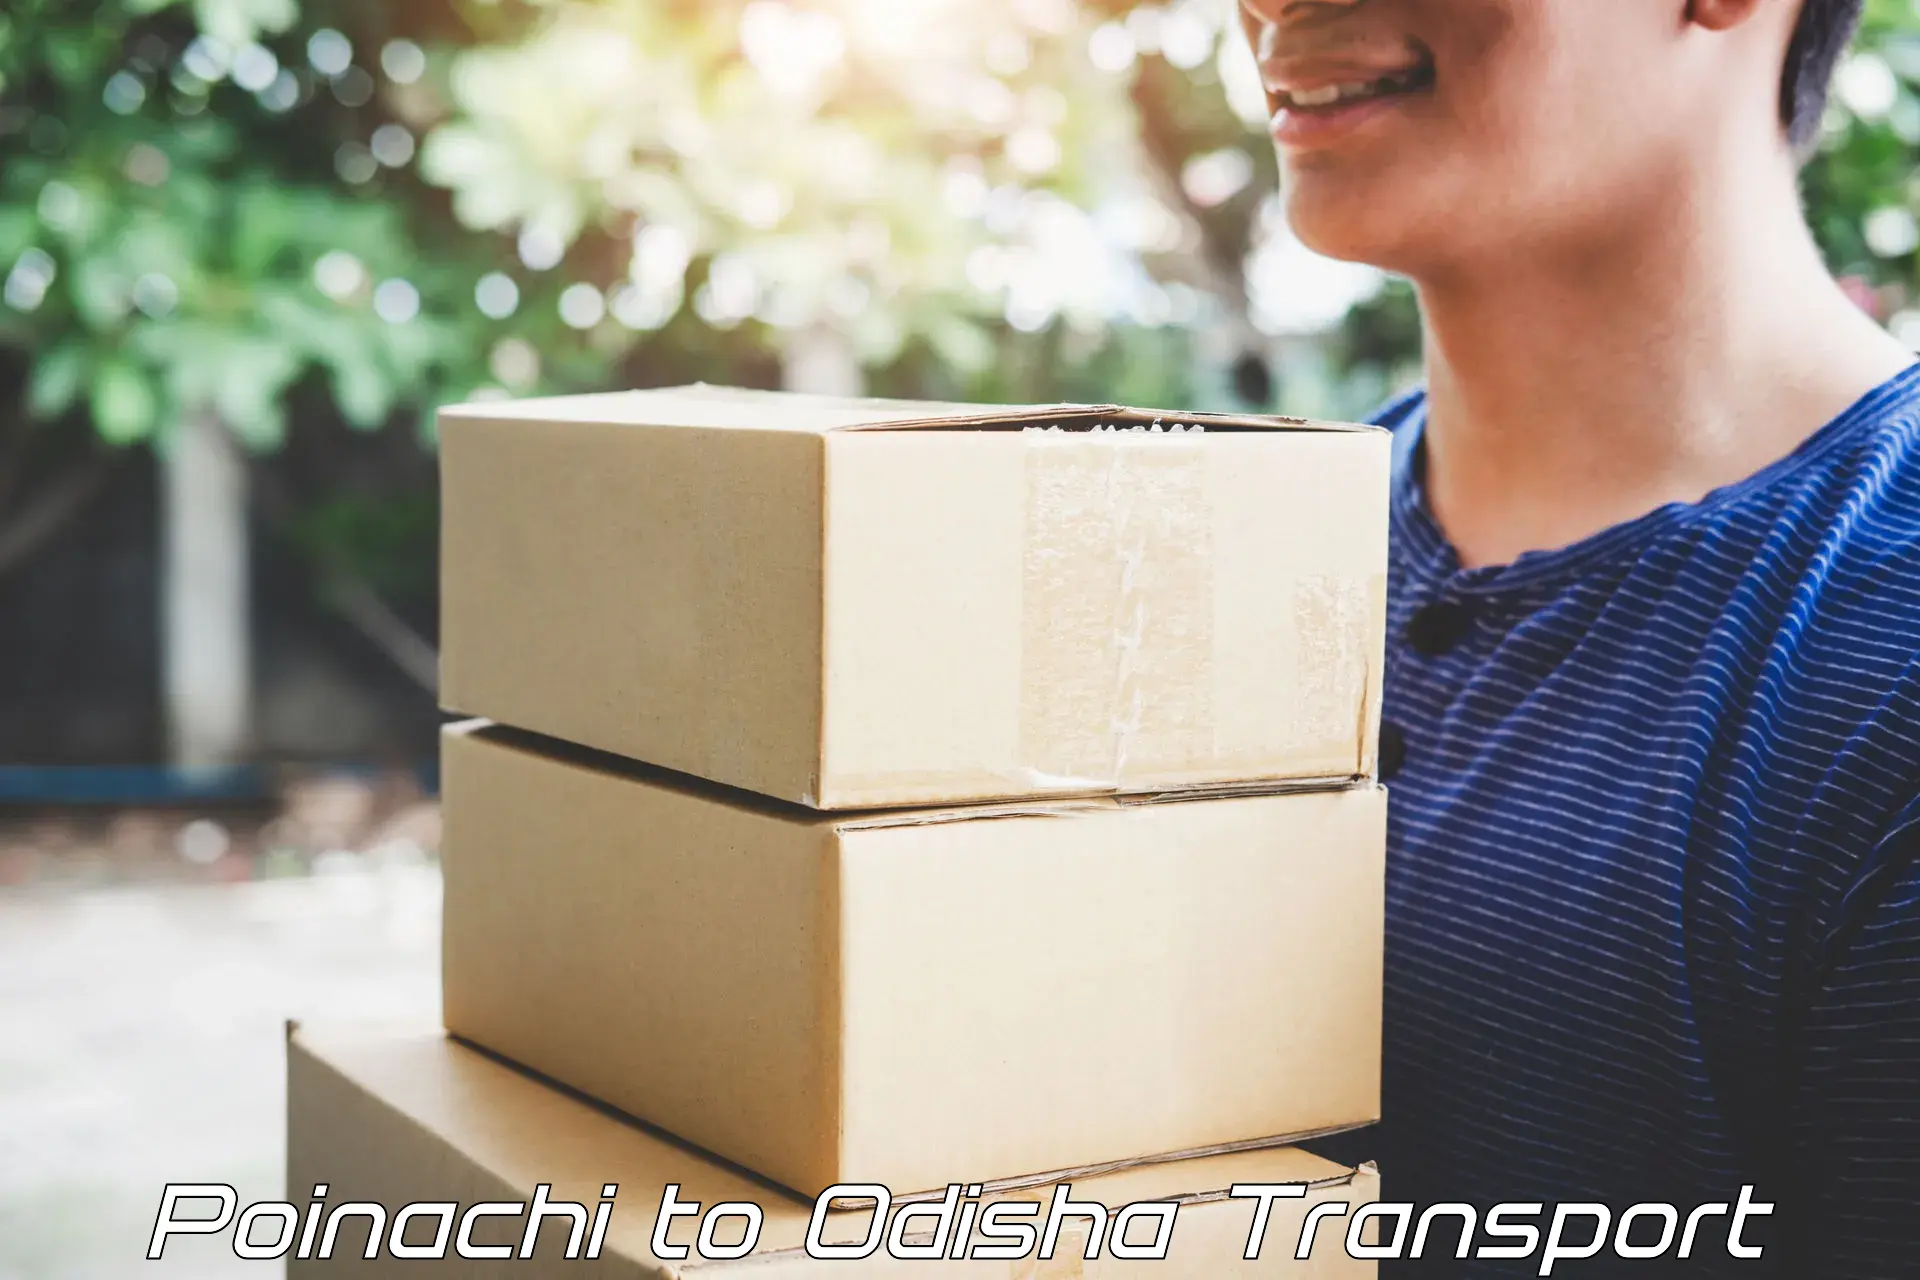 Online transport booking Poinachi to Asika